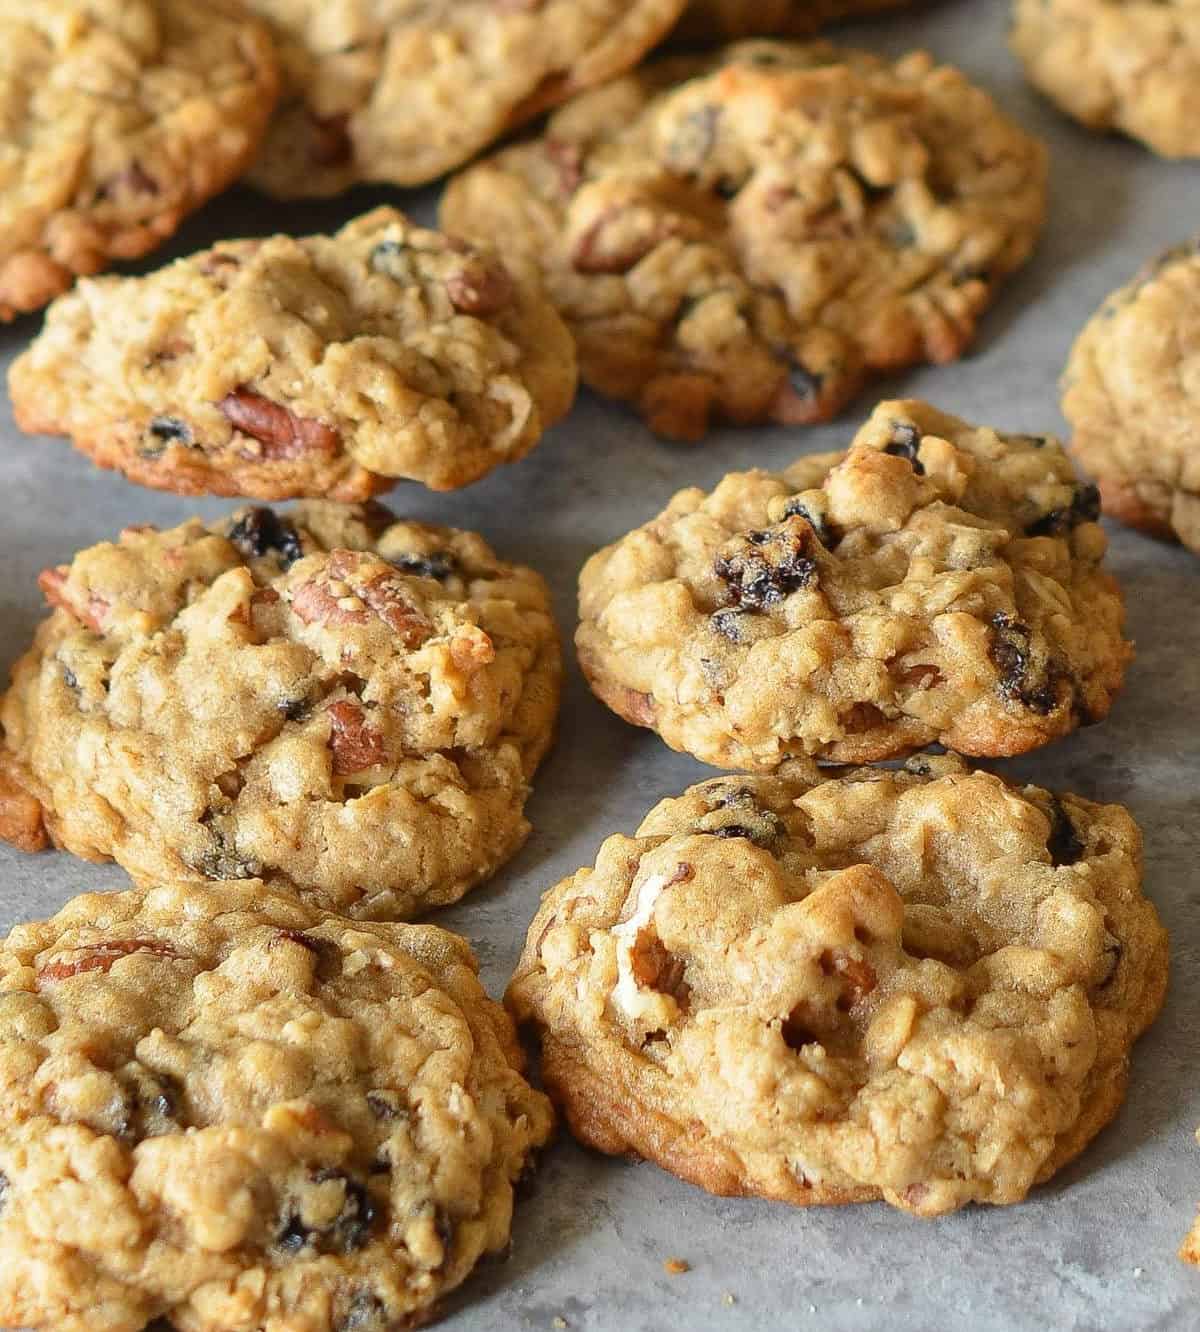  You'll love how easy and quick these cookies come together - perfect for those impromptu get-togethers!